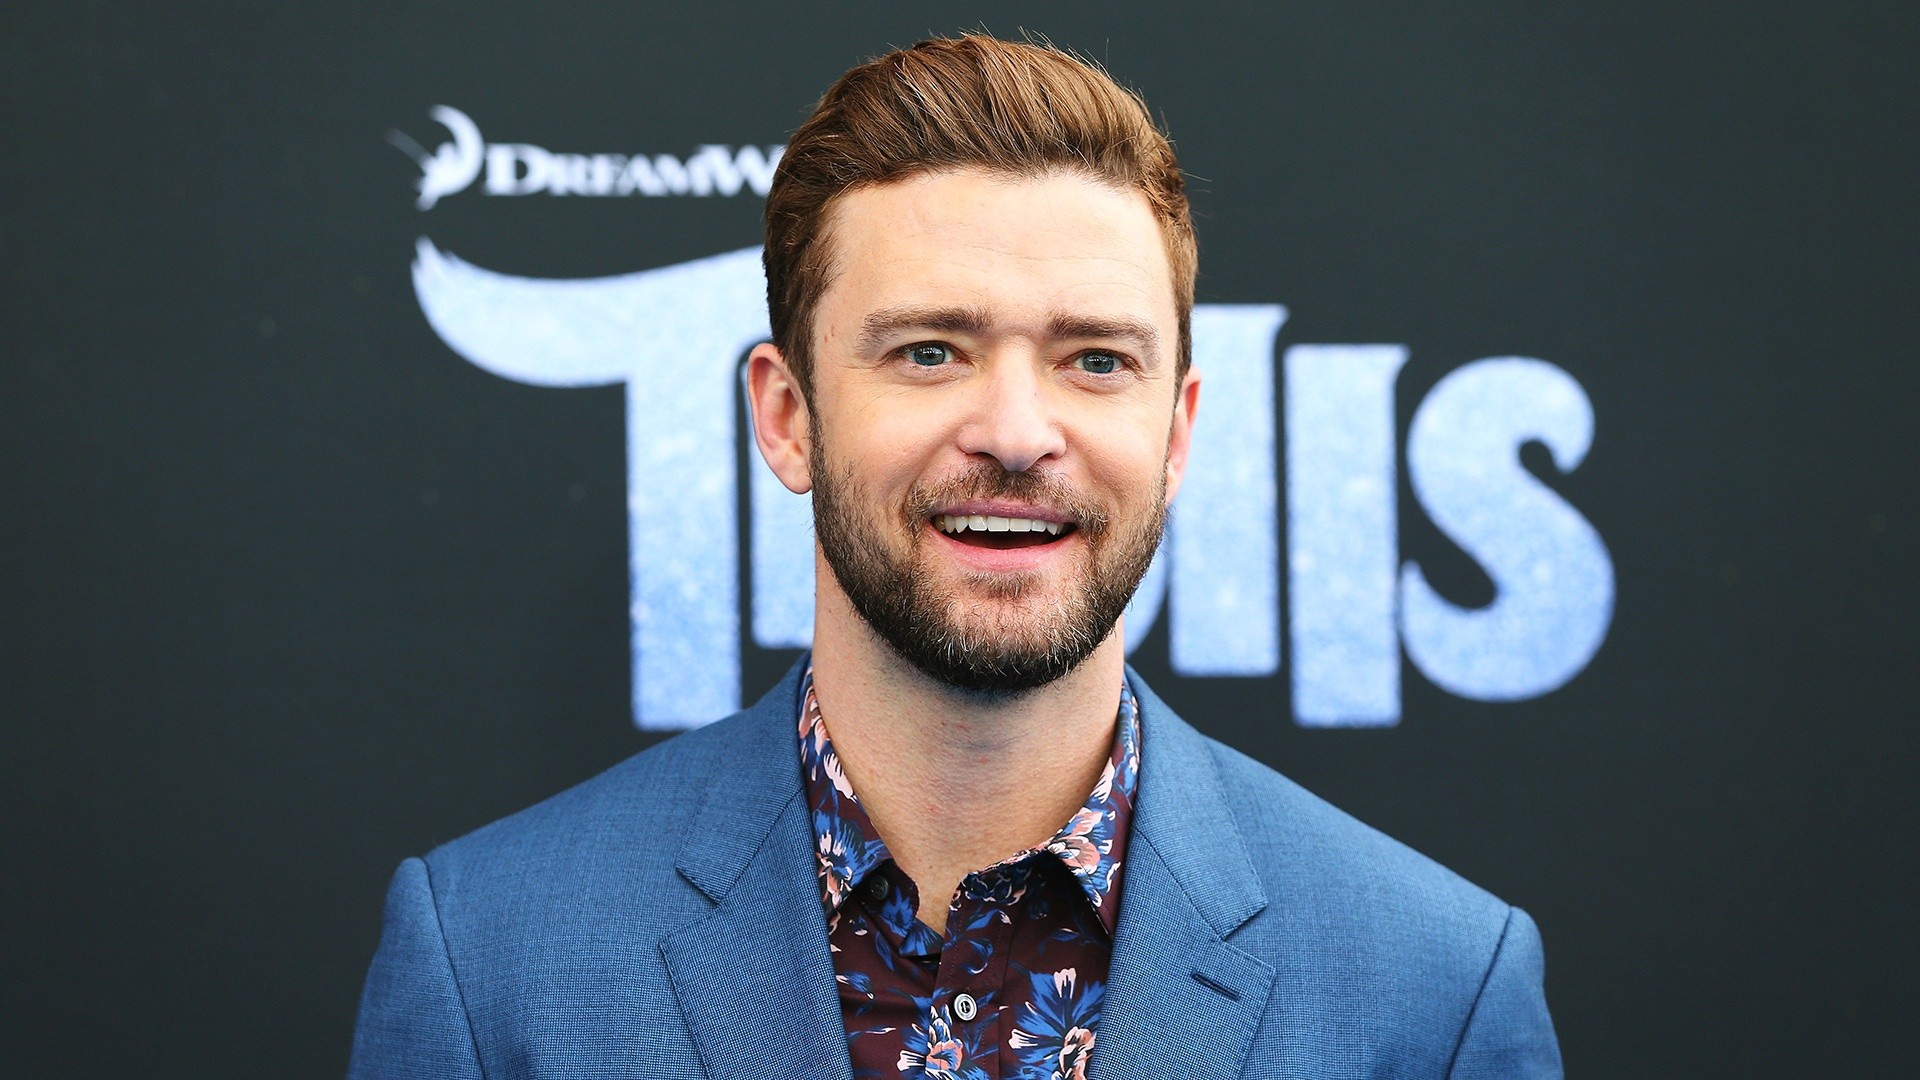 Justin Timberlake opens up about 'It's Gonna Be Me' meme